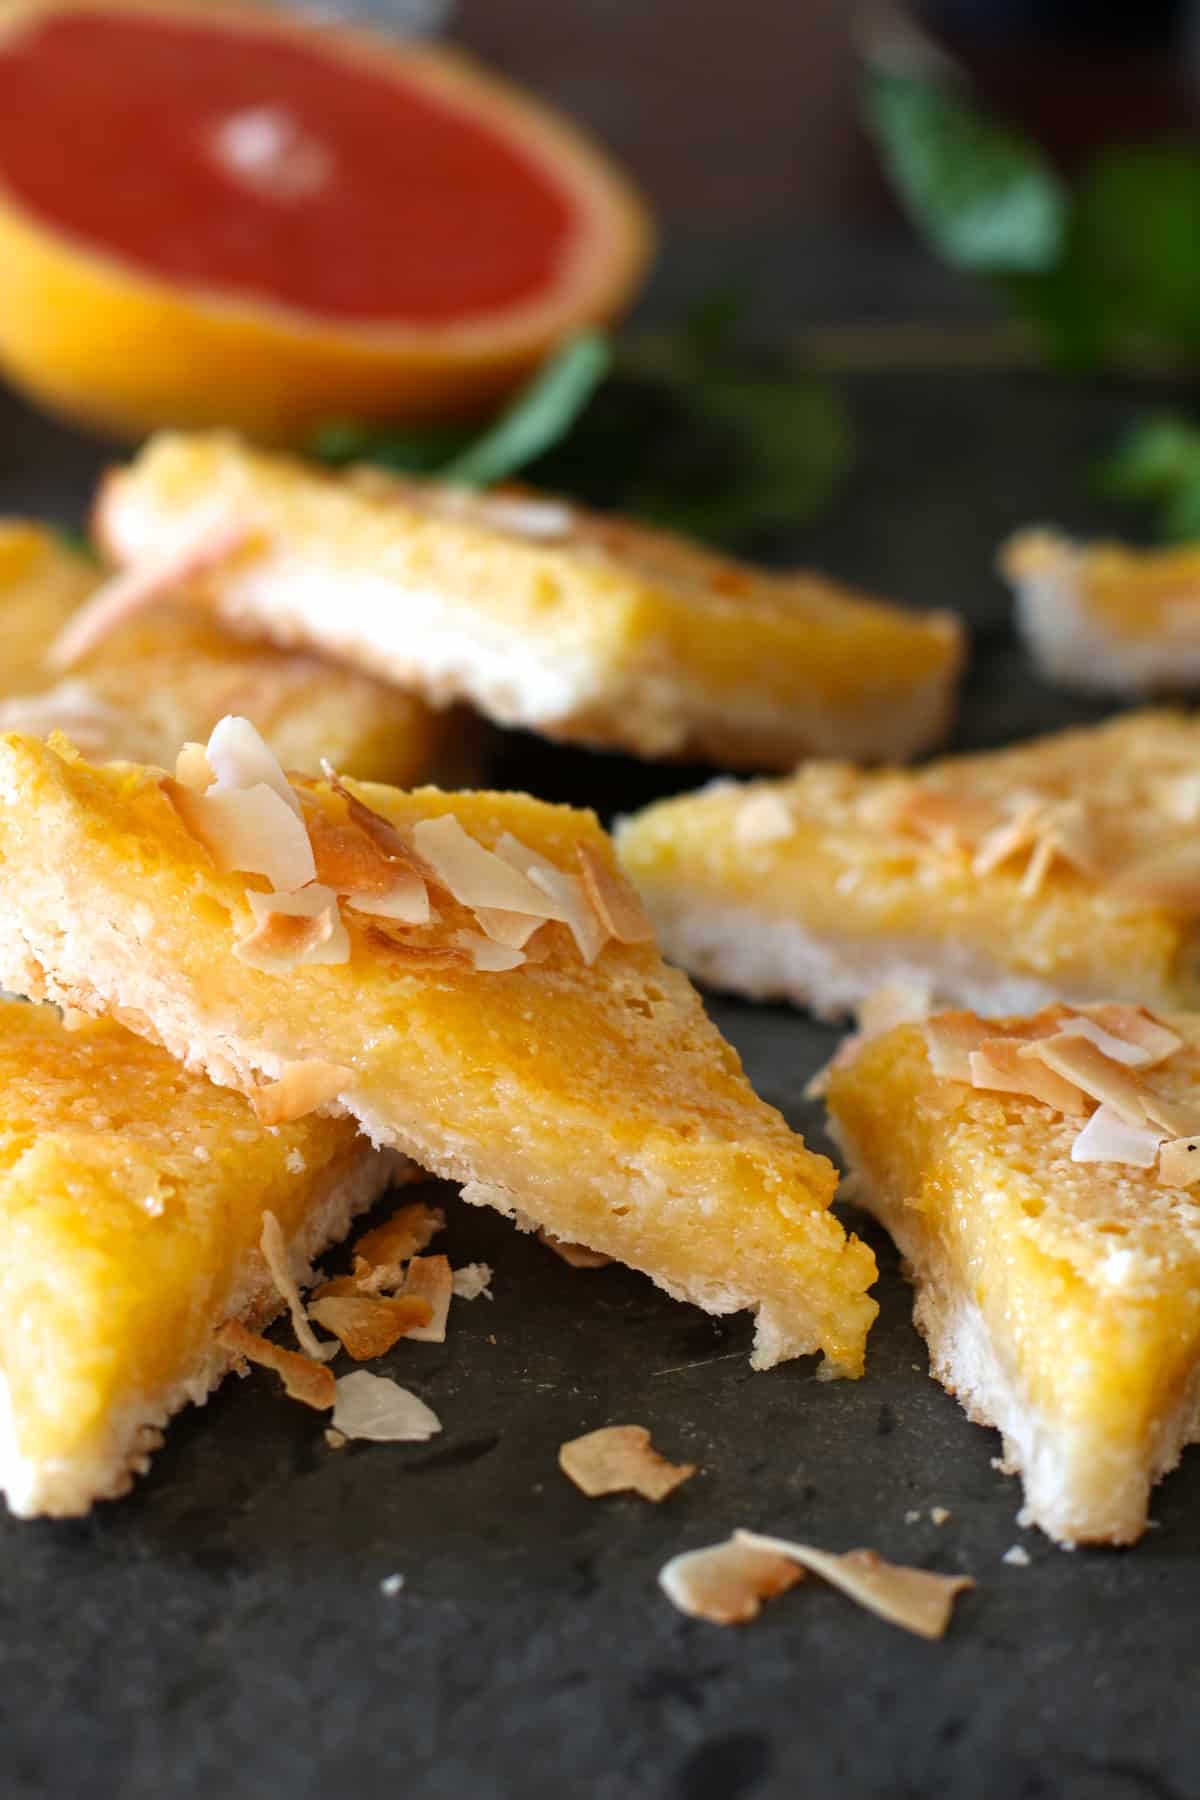 A new take on a classic, these grapefruit bars are tangy and delicious with a sweet coconut shortbread base